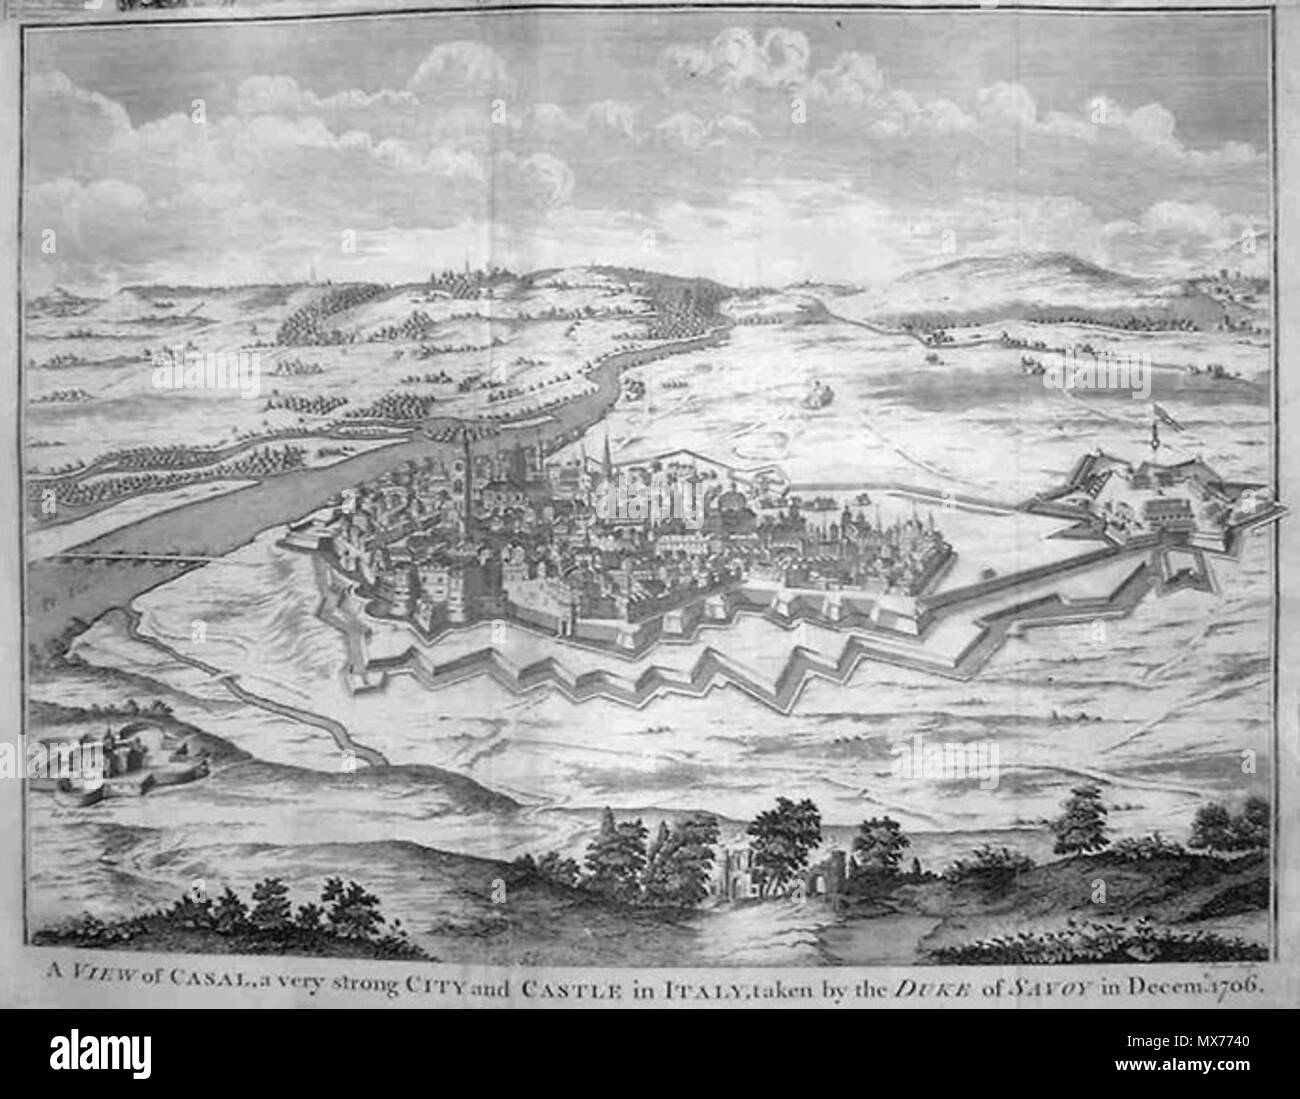 . A View of Casal (today Casale Monferrato) ‘a very strong city & castle in Italy taken by the Duke of Savoy in Decem. 1706’, copper engraving, 35 x 48cm . 1745, London. Basire-Rapin 117 Casal-1745 Stock Photo